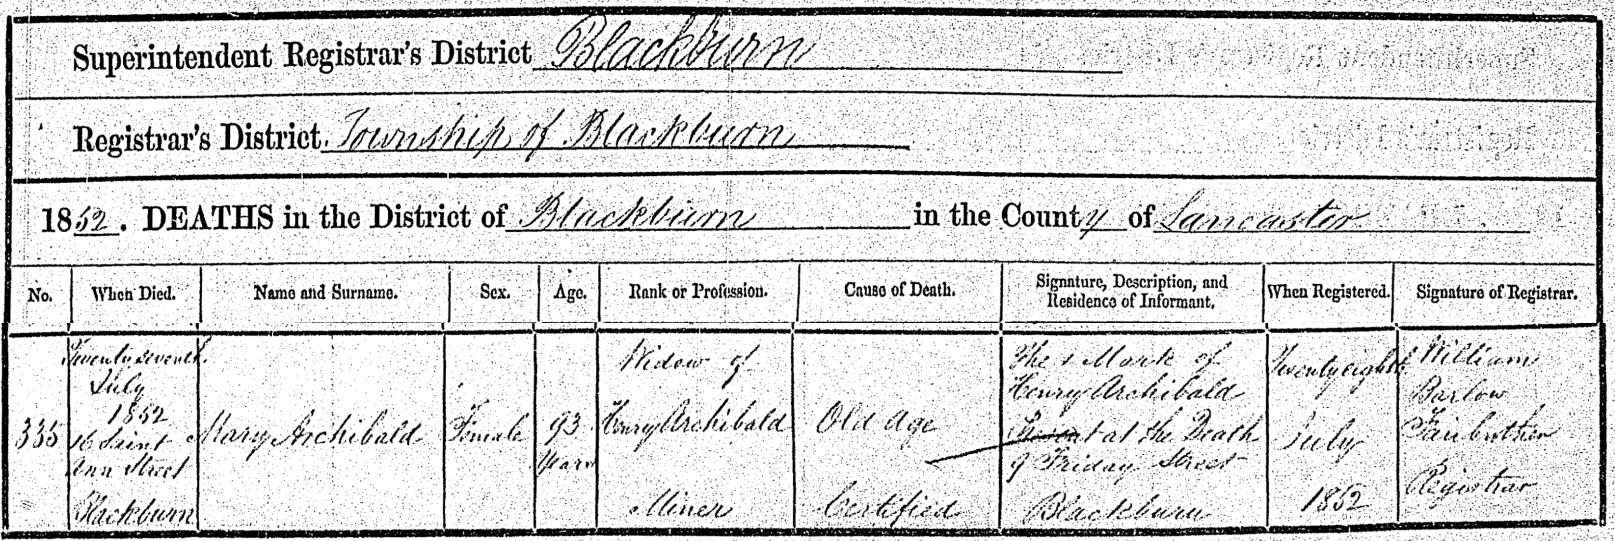 Mary's death certificate